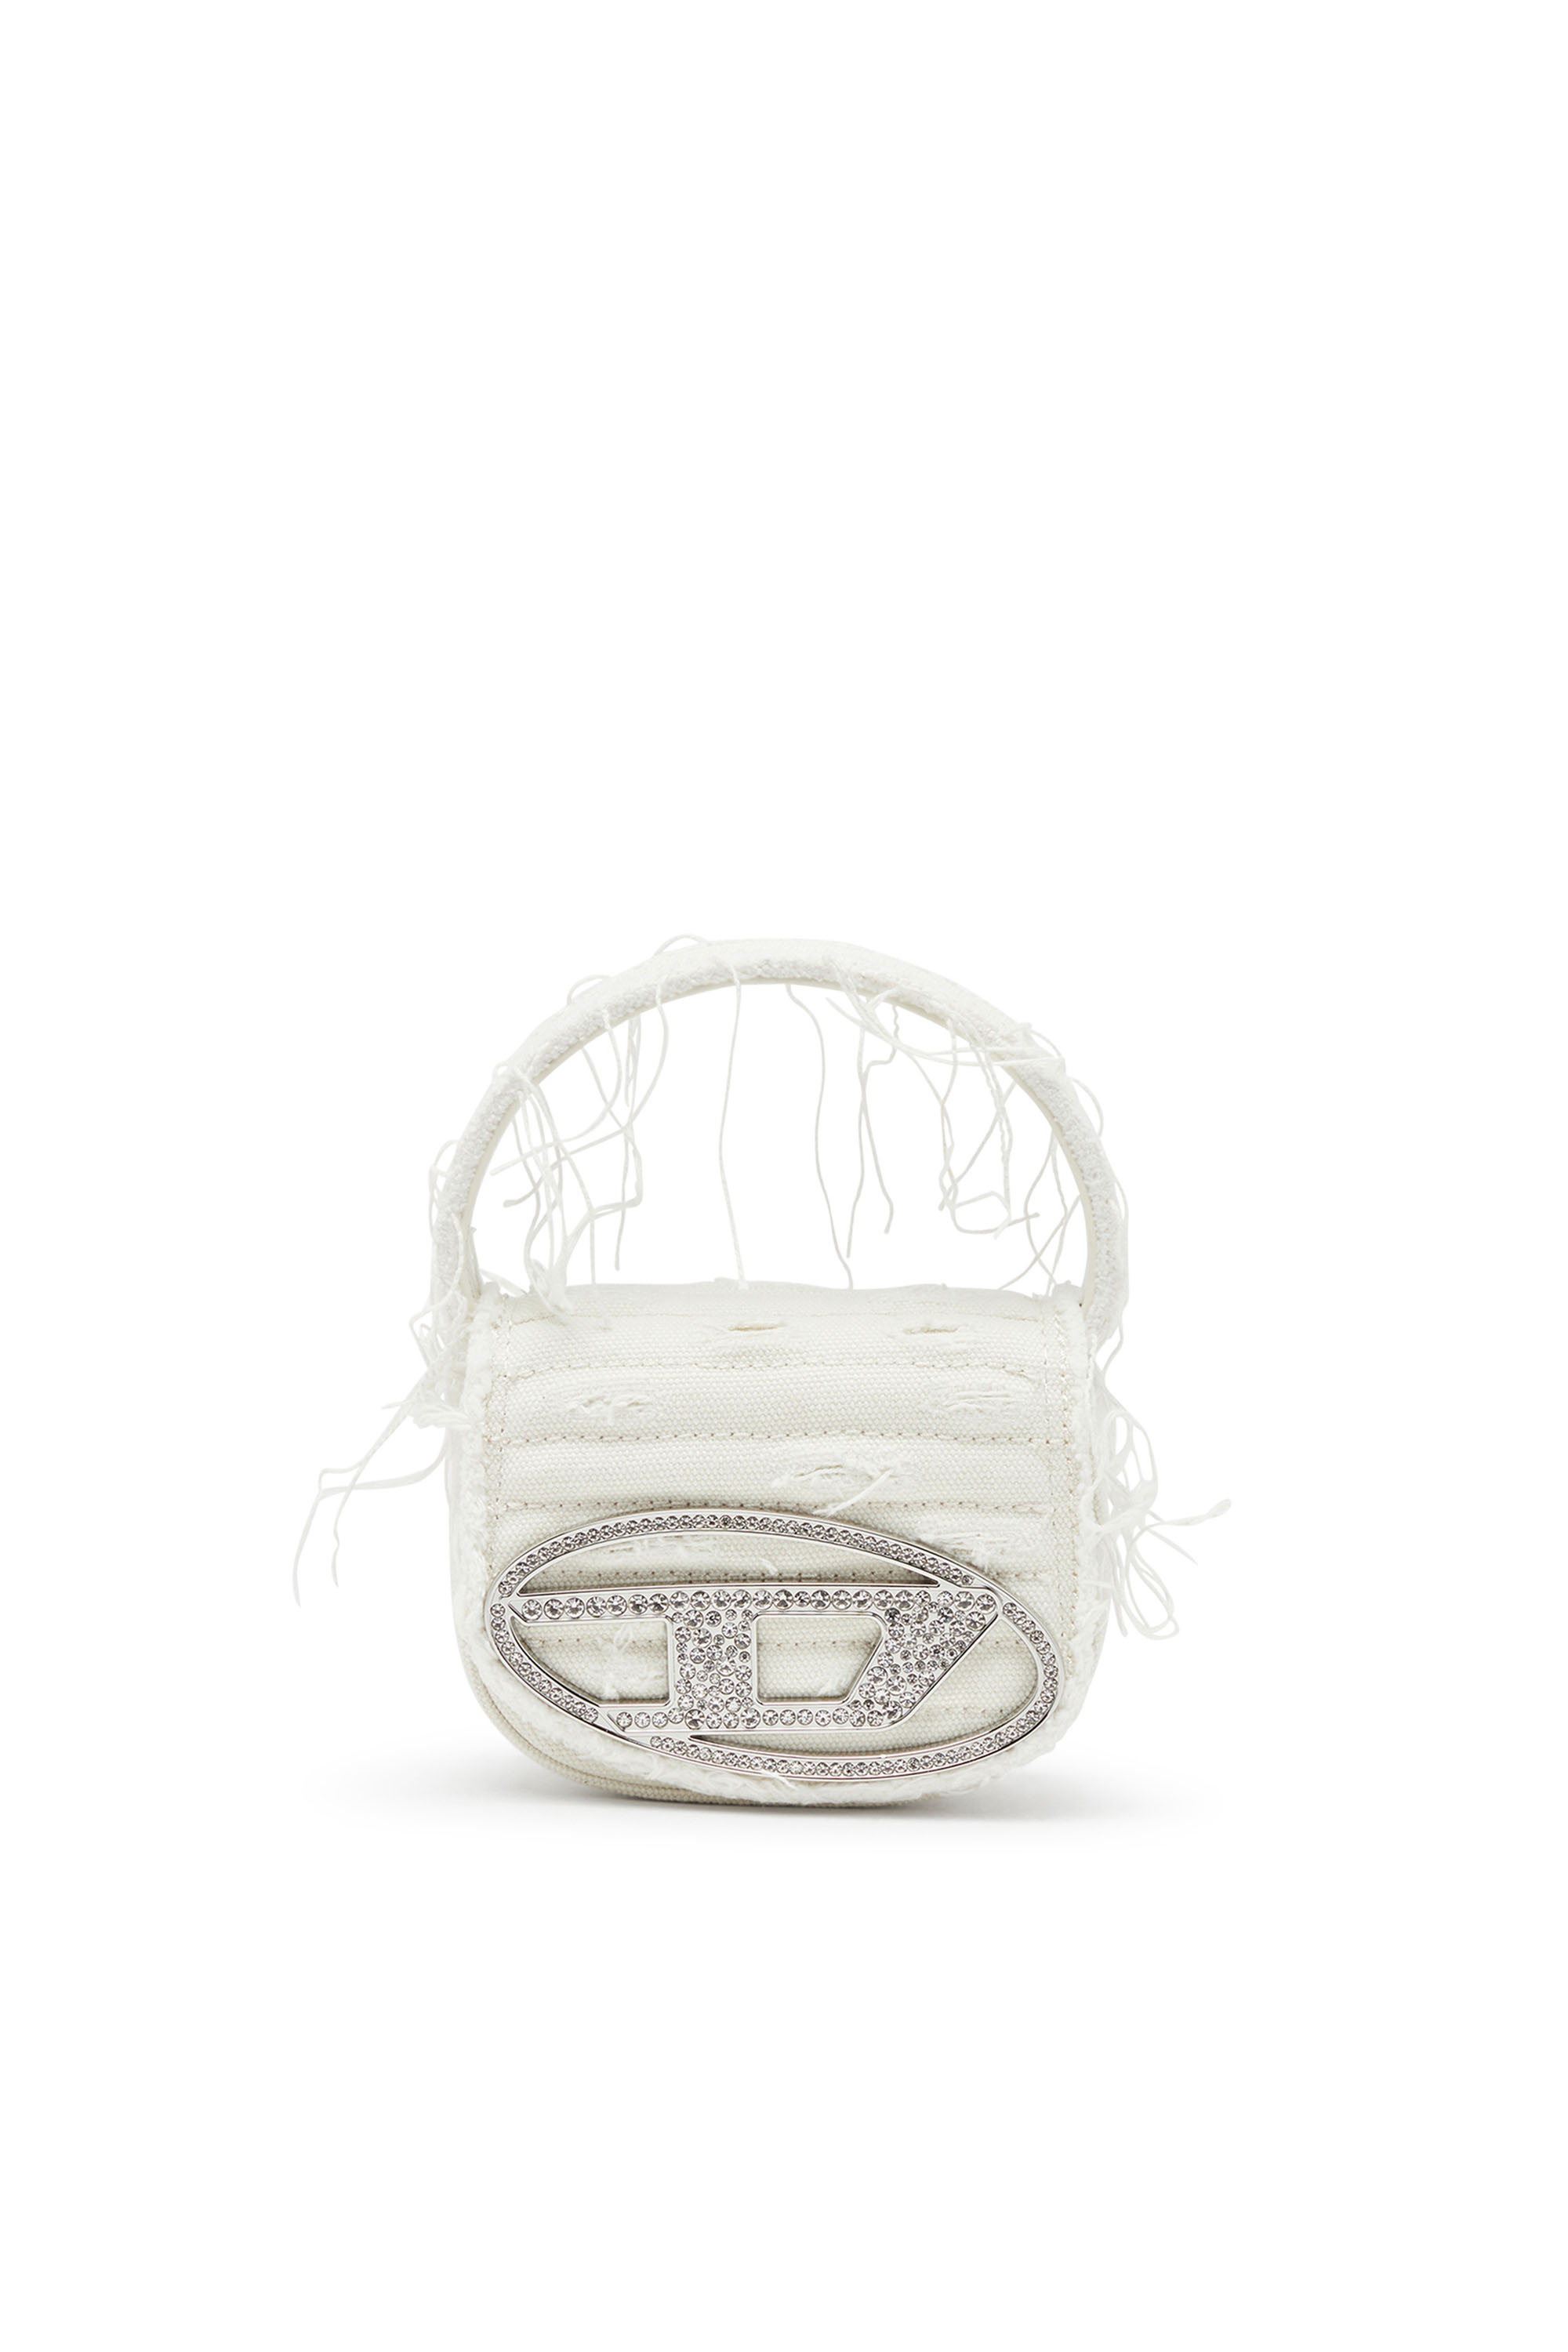 Diesel - 1DR XS, Woman 1DR XS-Iconic mini bag in canvas and leather in White - Image 1